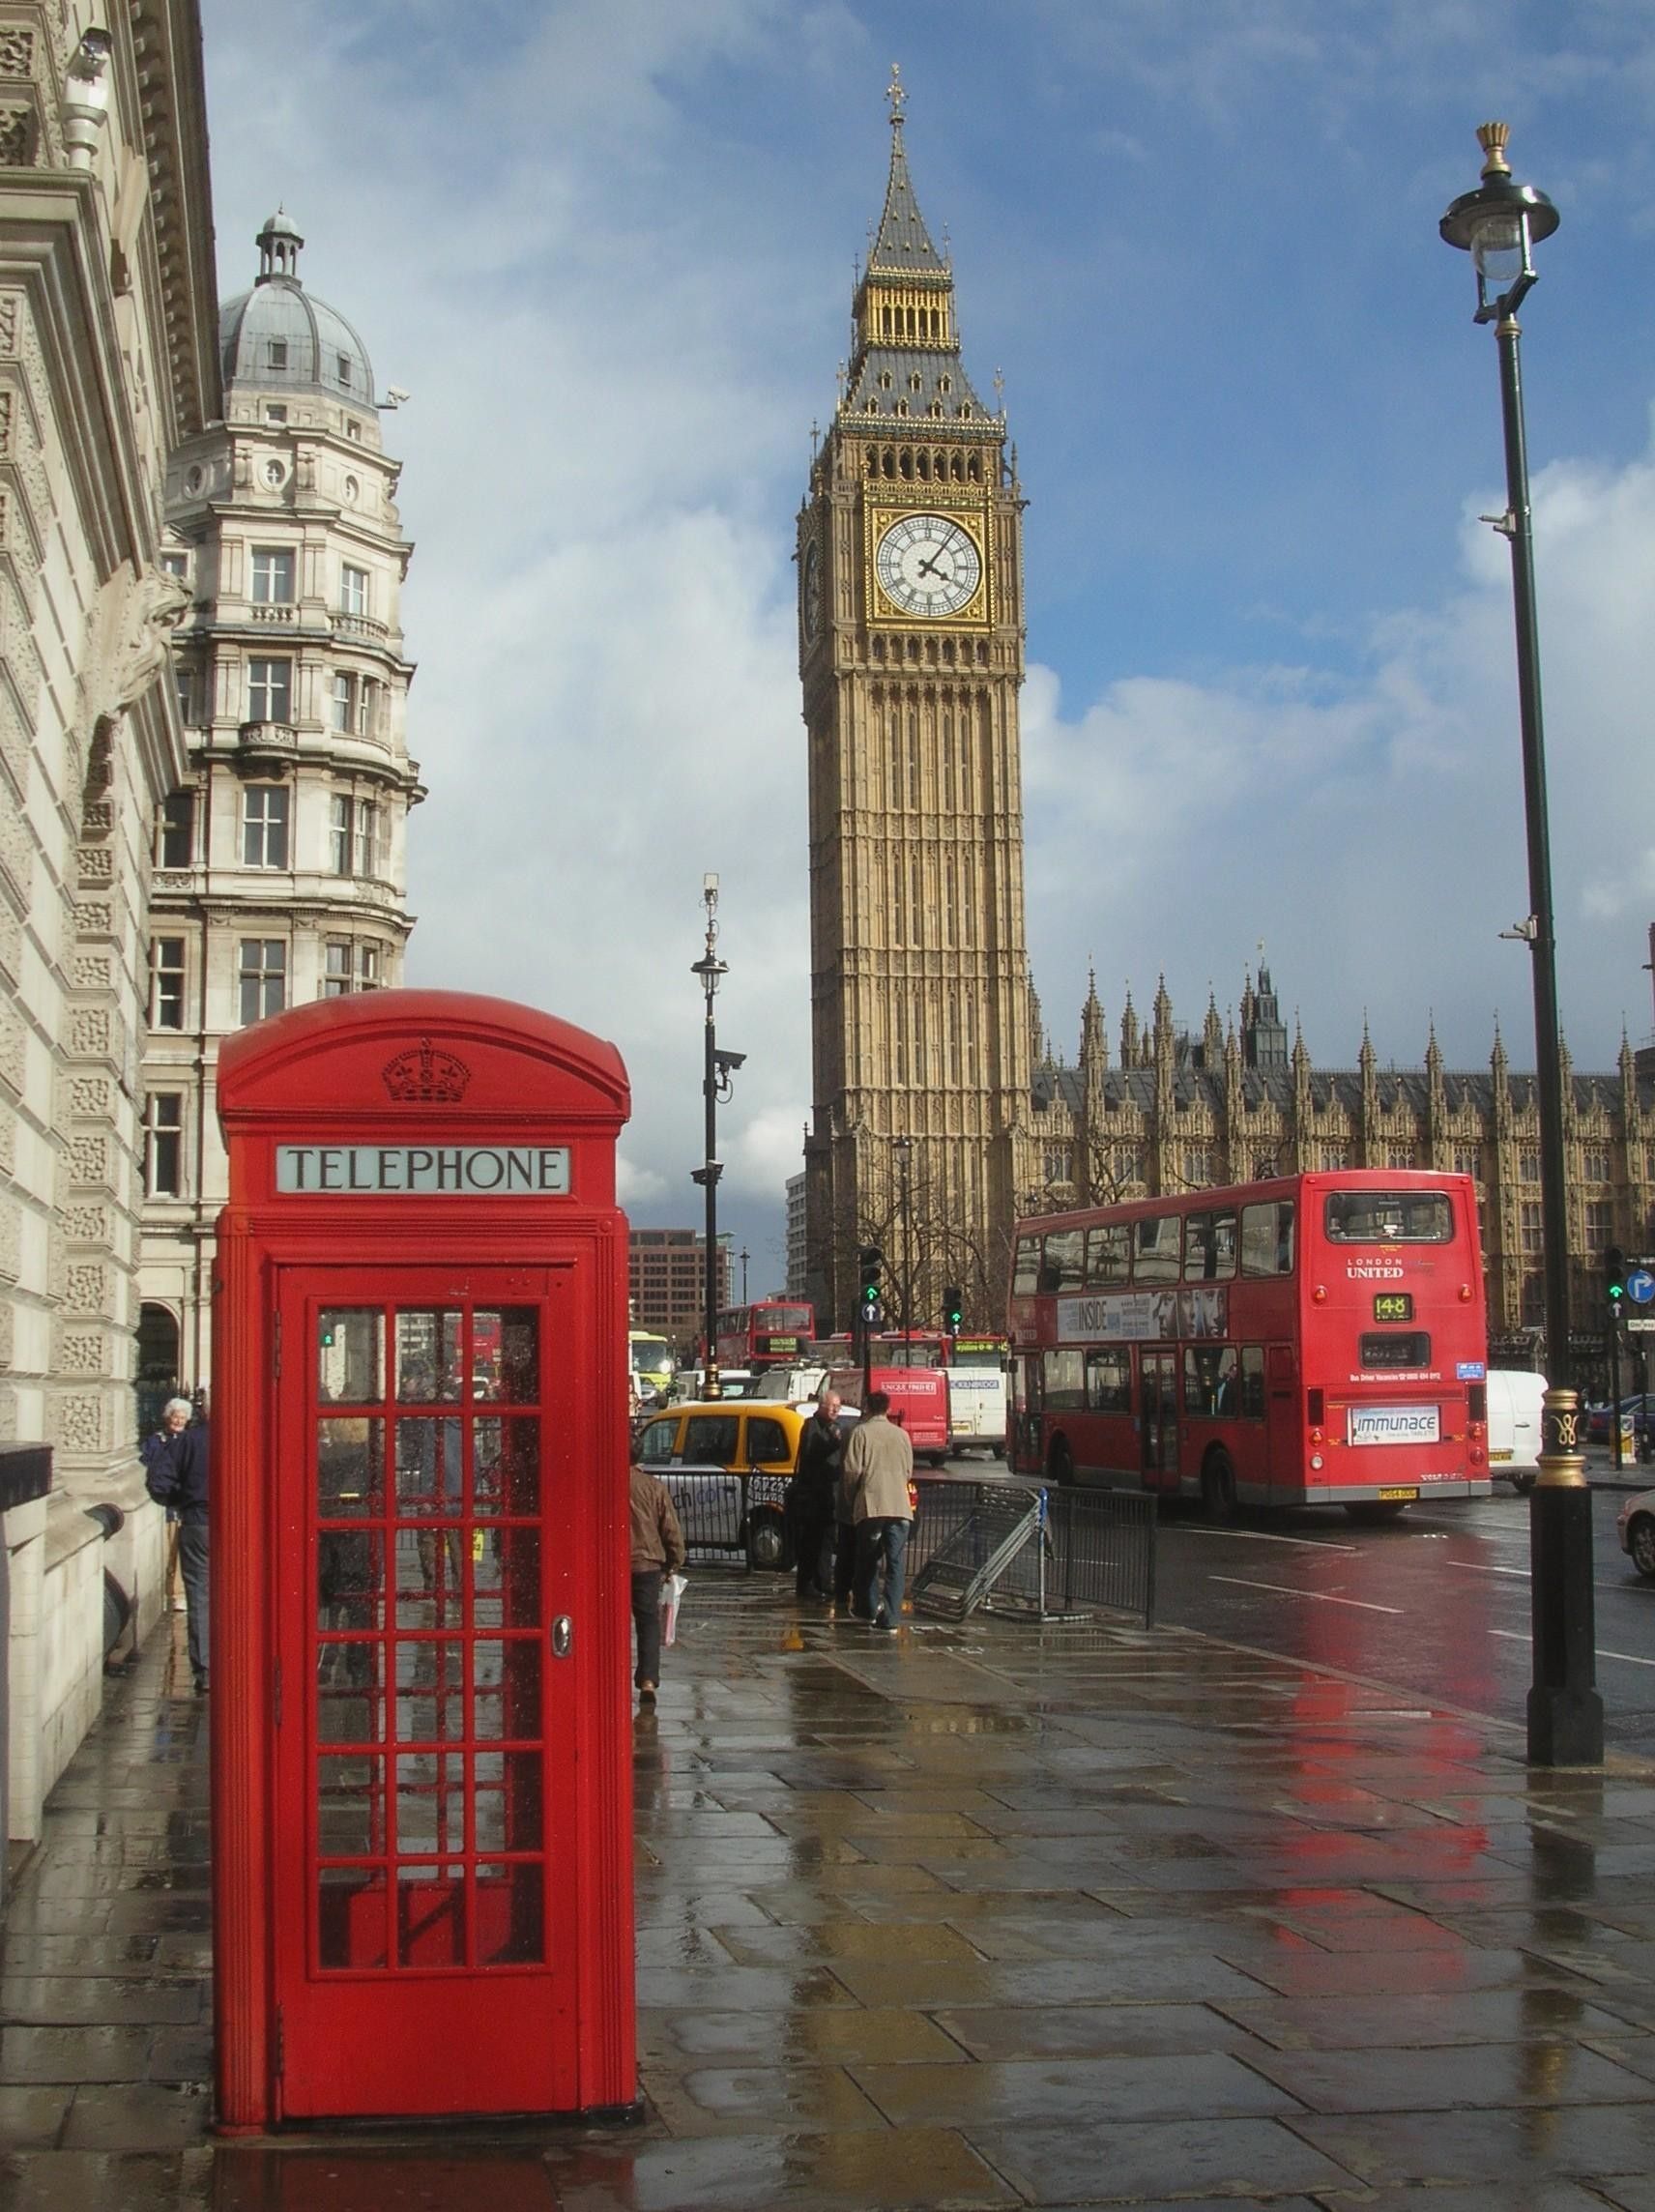 London Phone Booth Wallpaper Free London Phone Booth Background